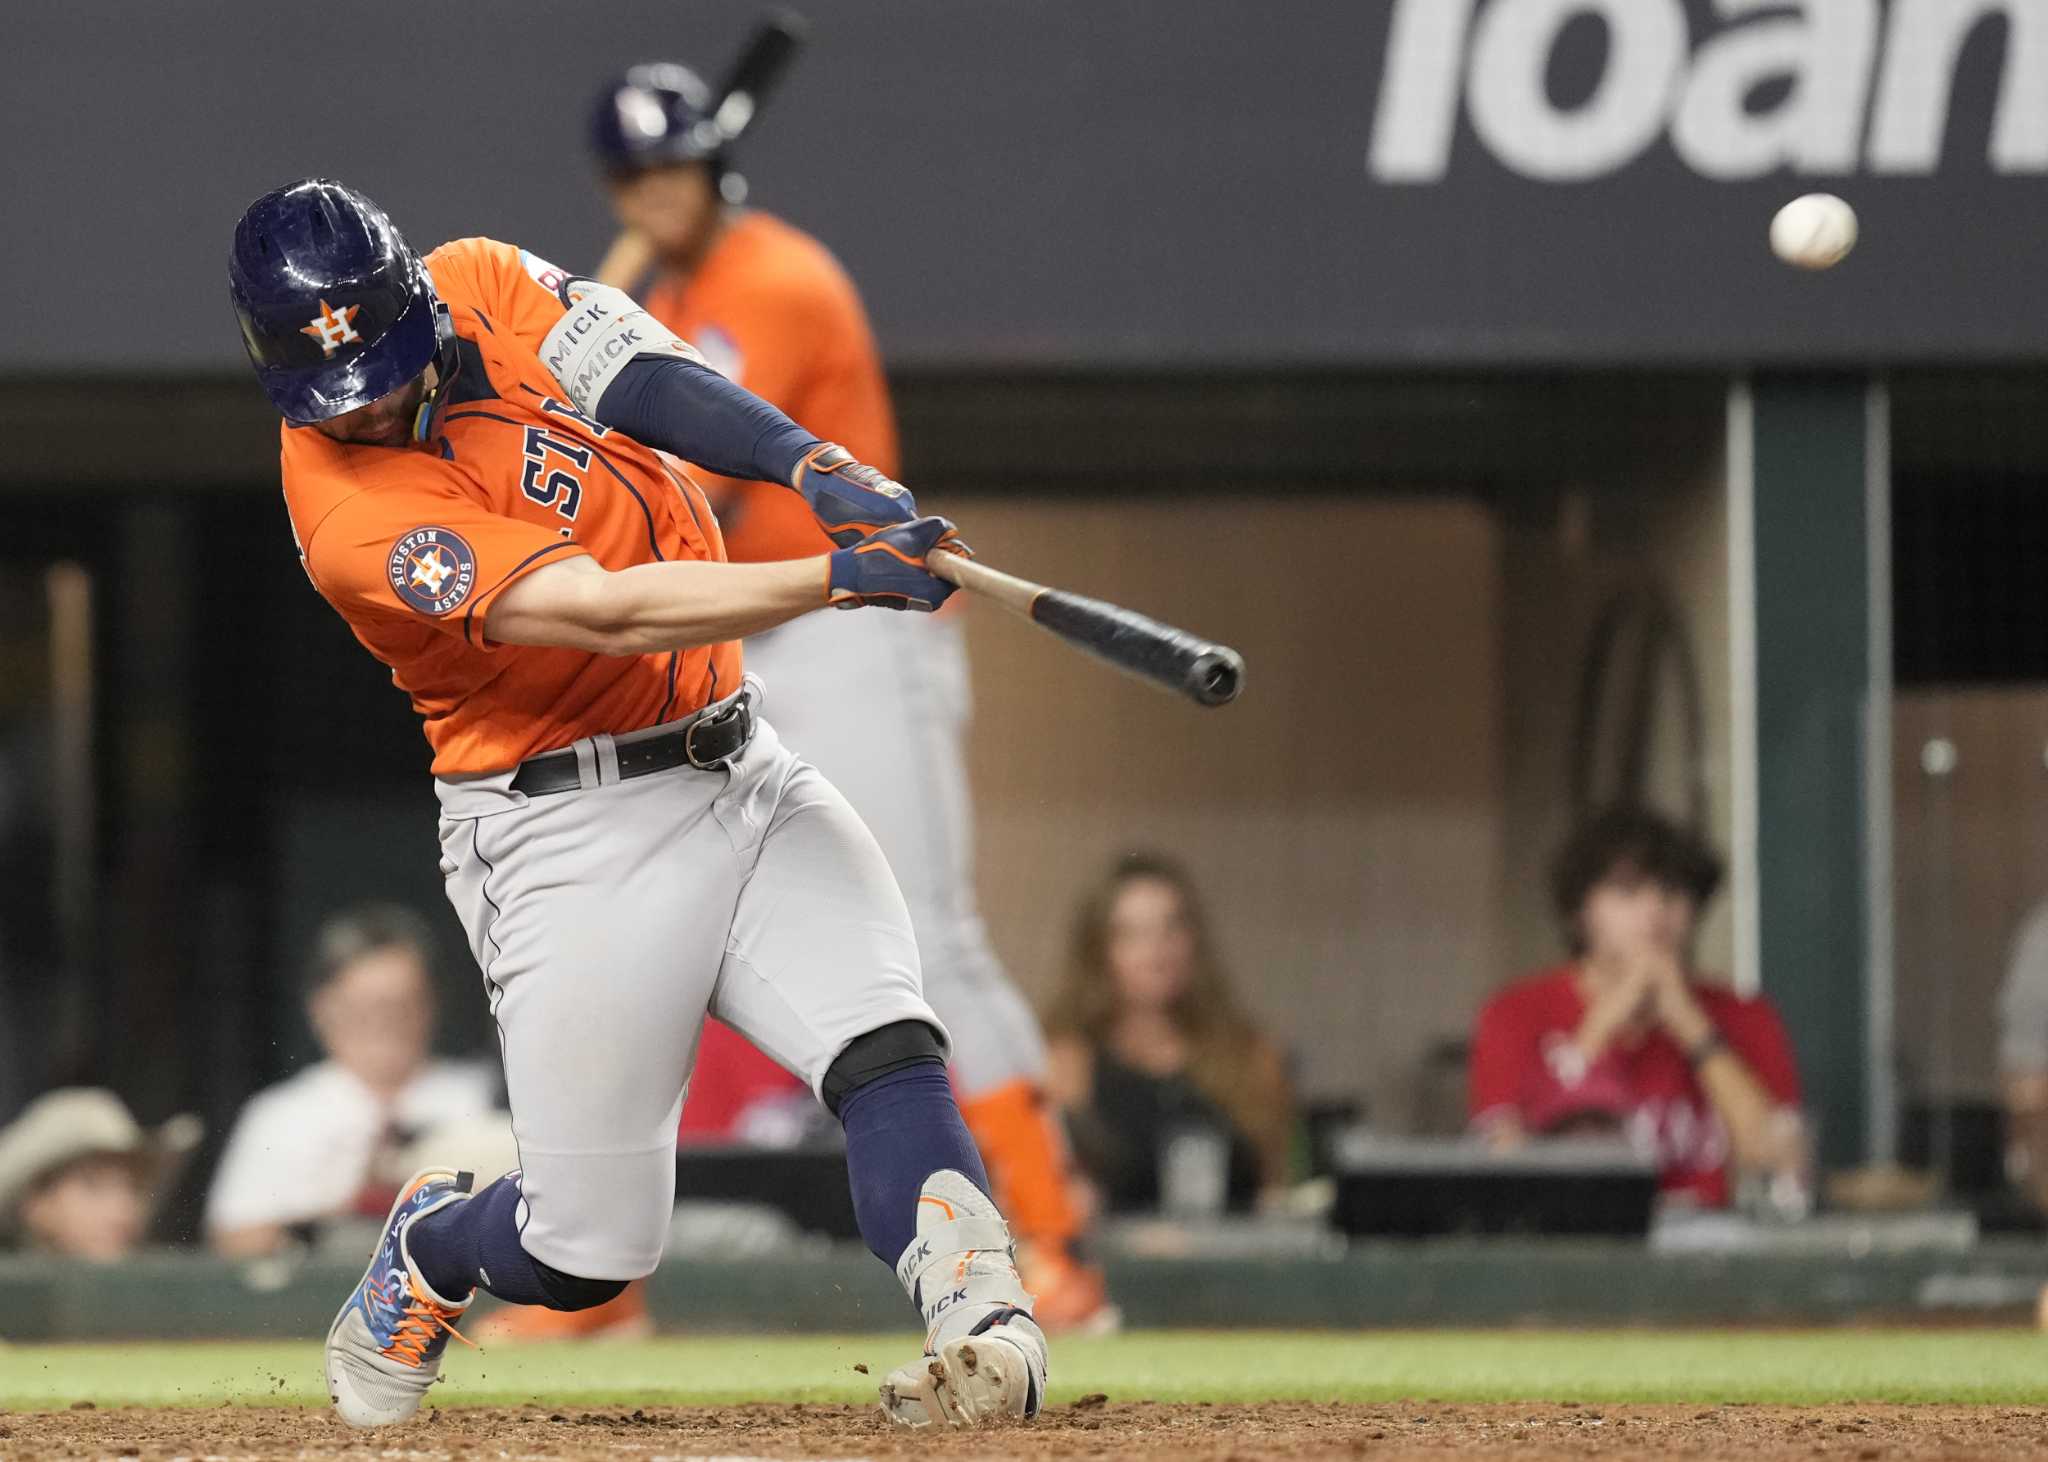 Why Astros SS Jeremy Peña shows heart sign after hitting homers